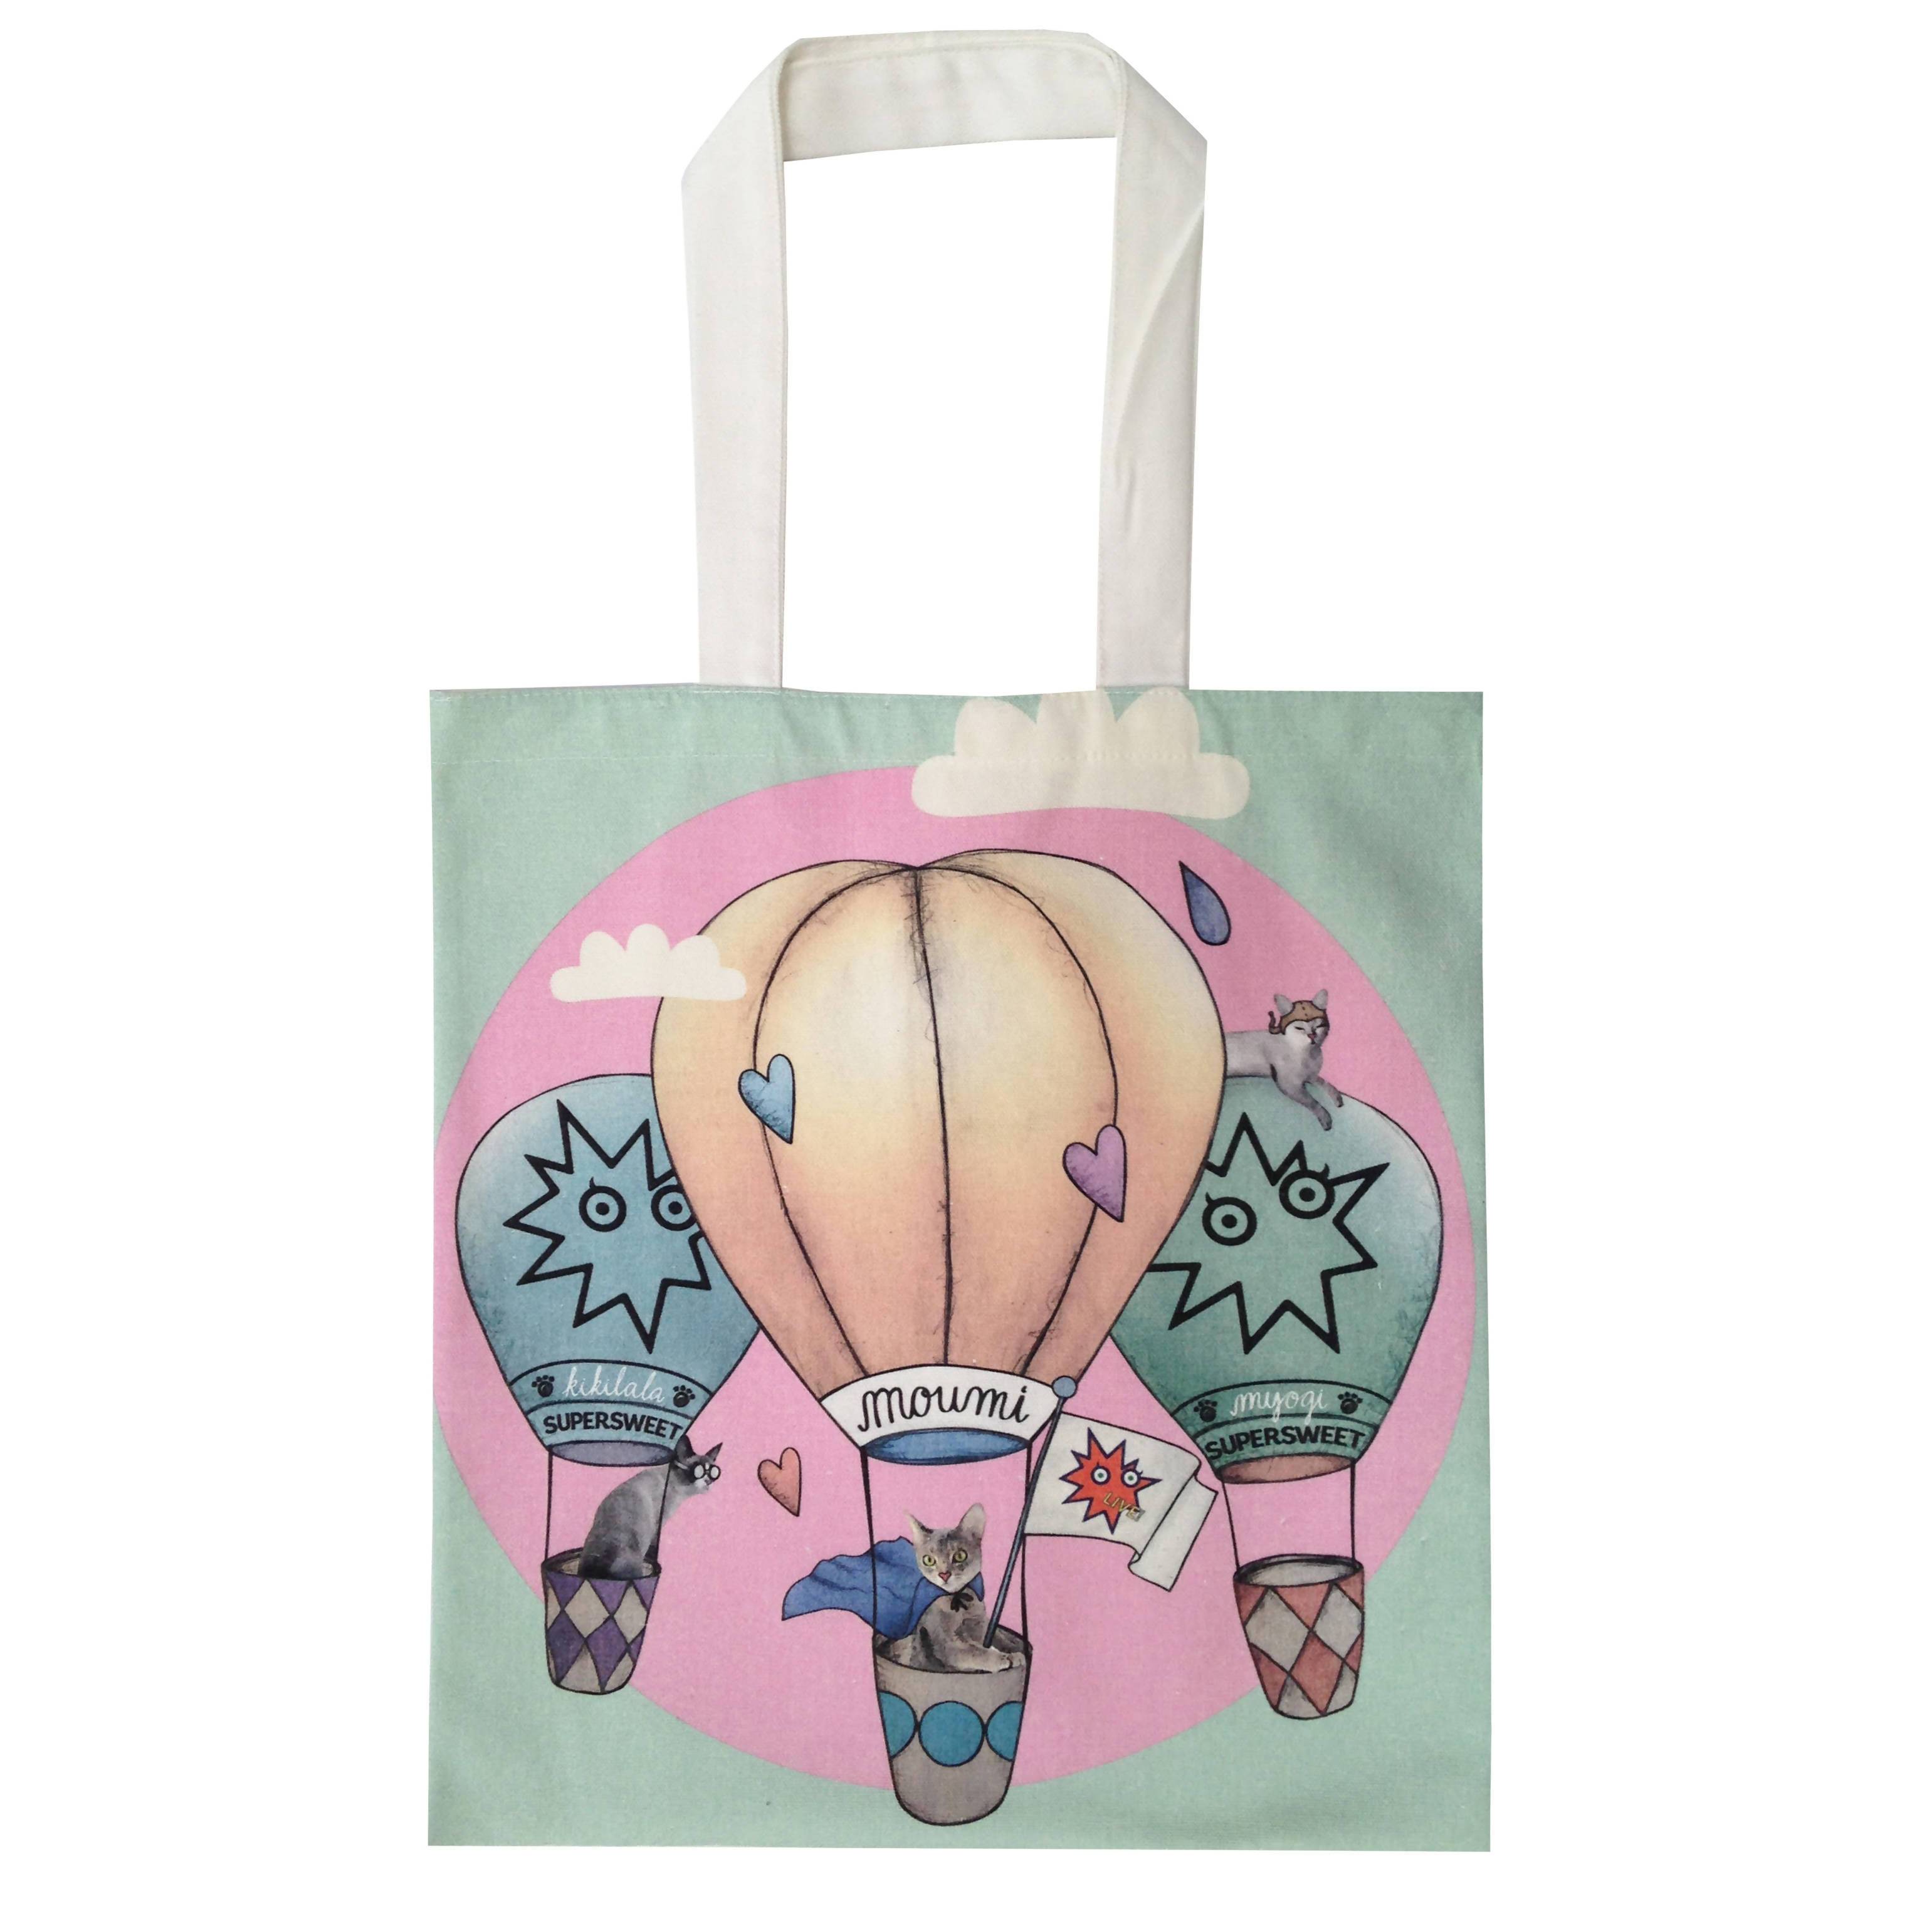 Around the World Handsome Tote White Clouds - Tote Bags - By Moumi - Naiise